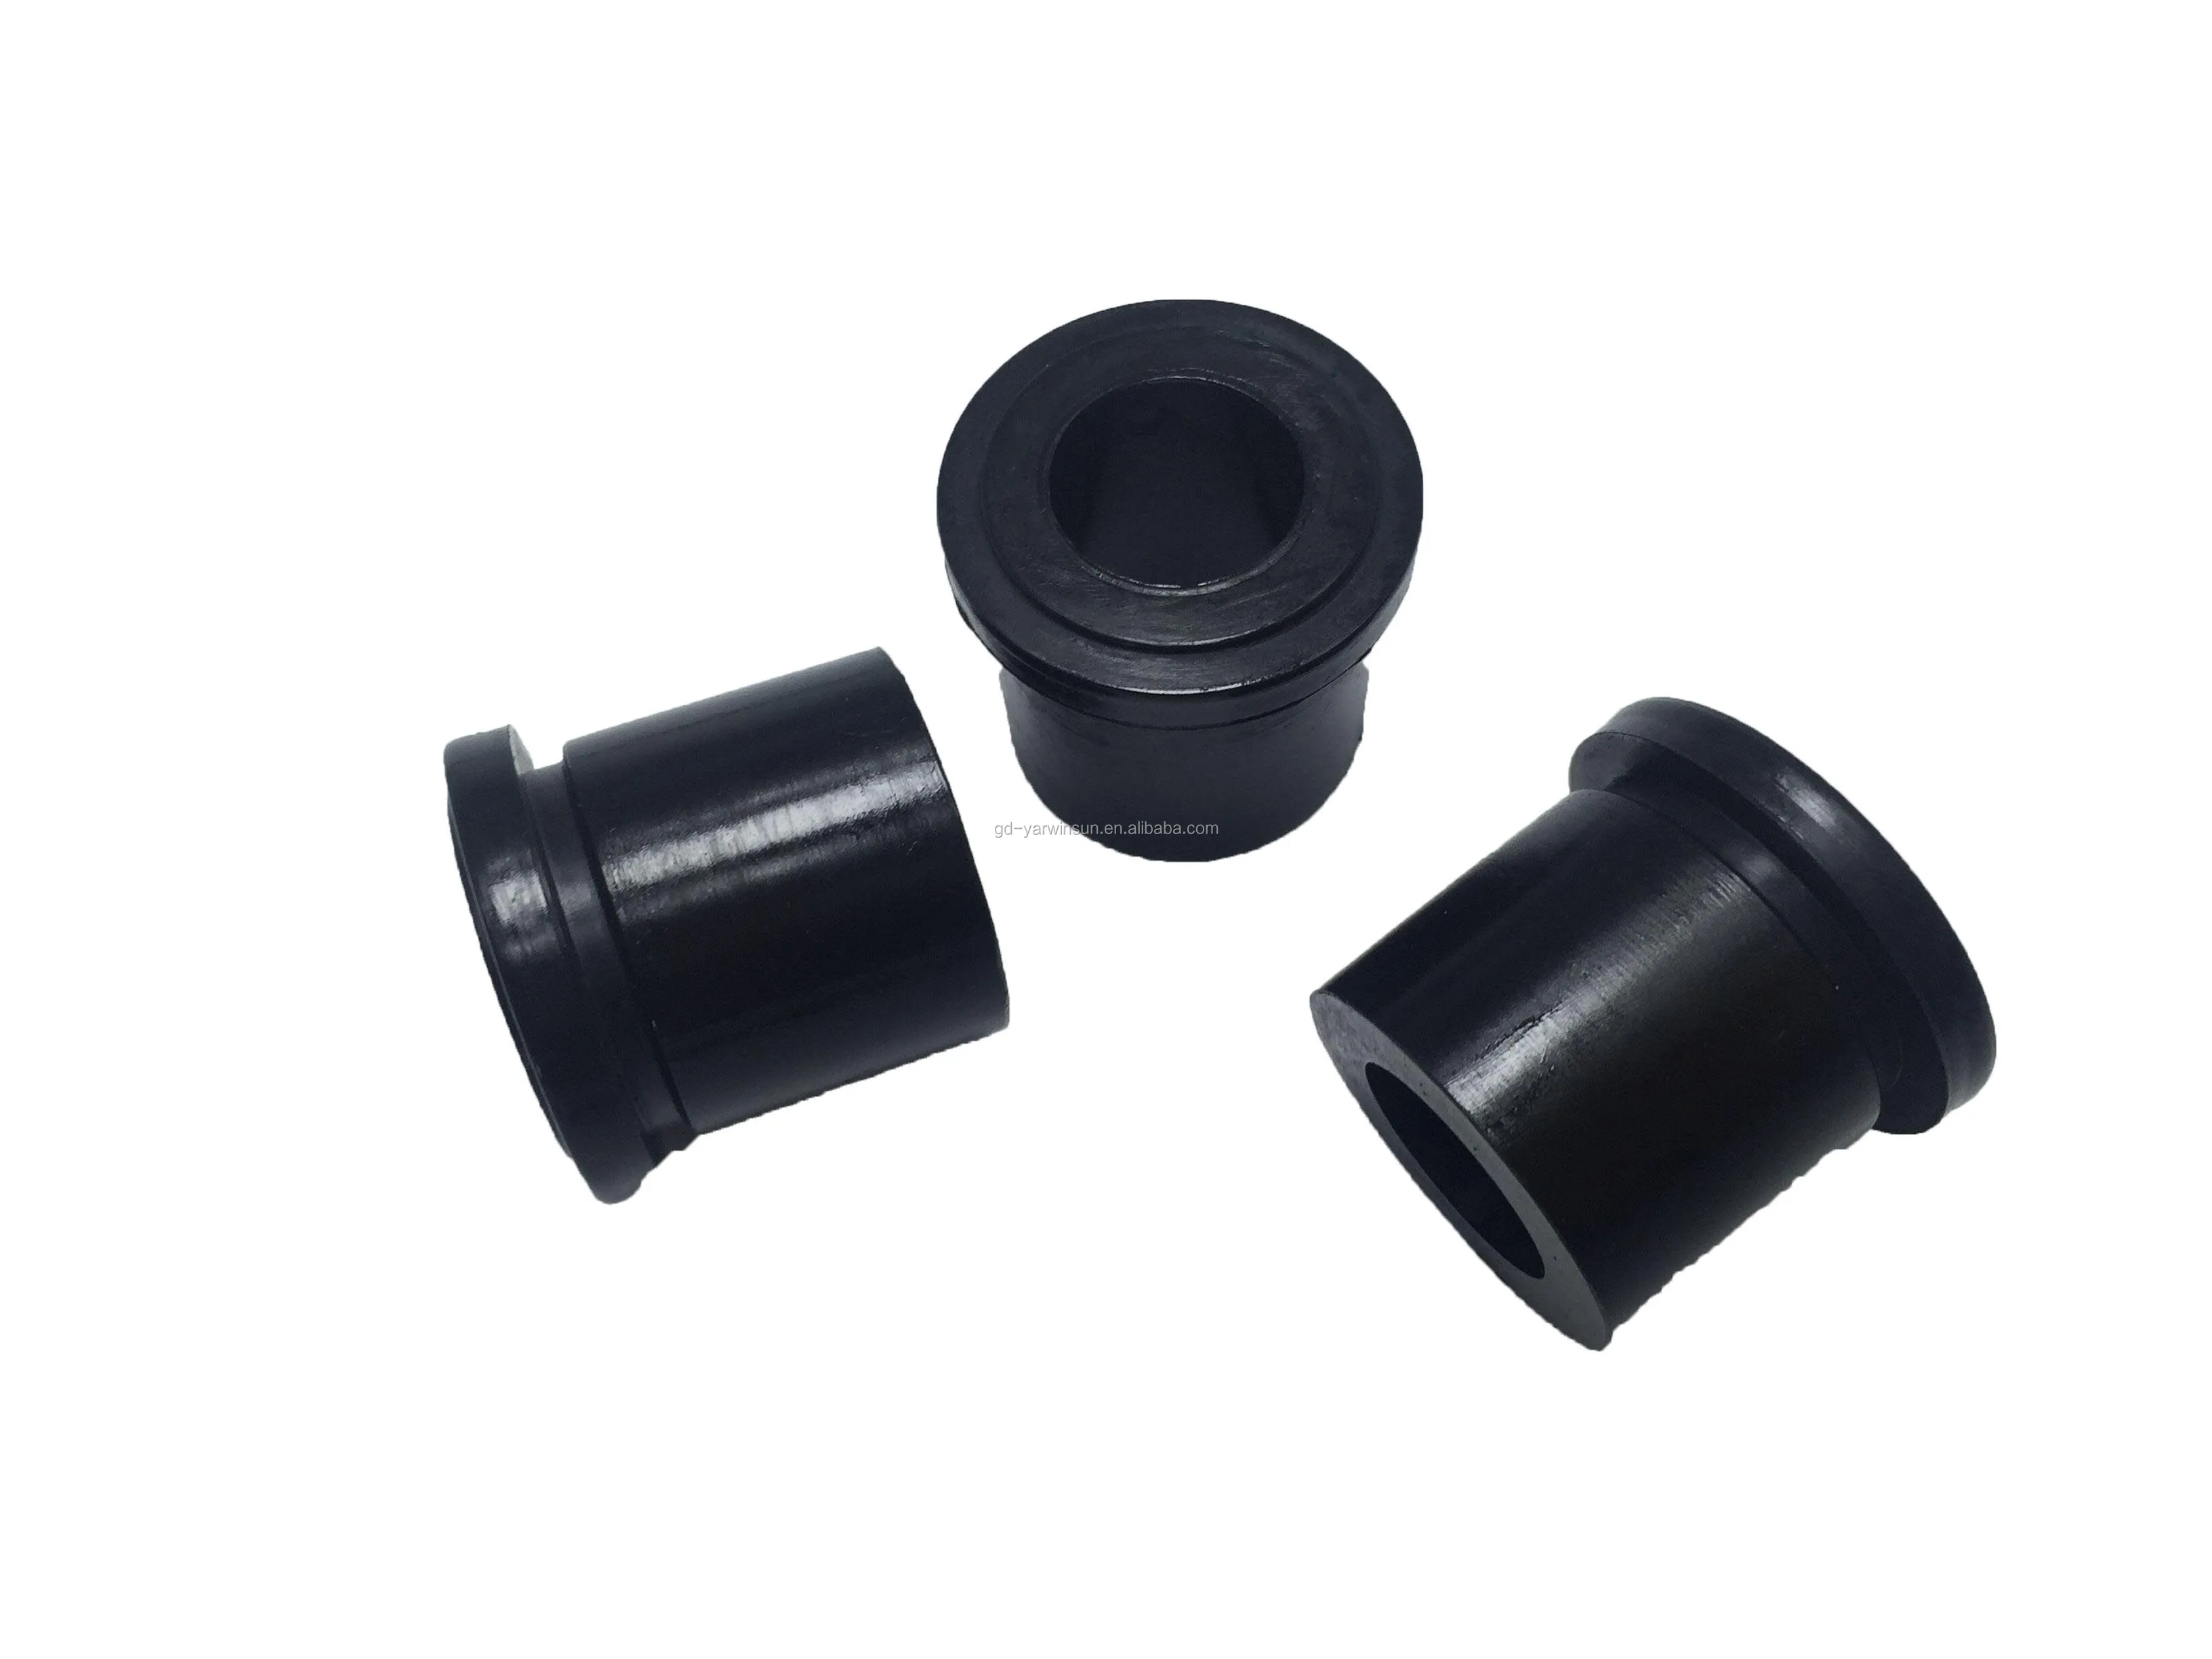 Wear-resisting Standard Rubber Bush for Industry and Auto